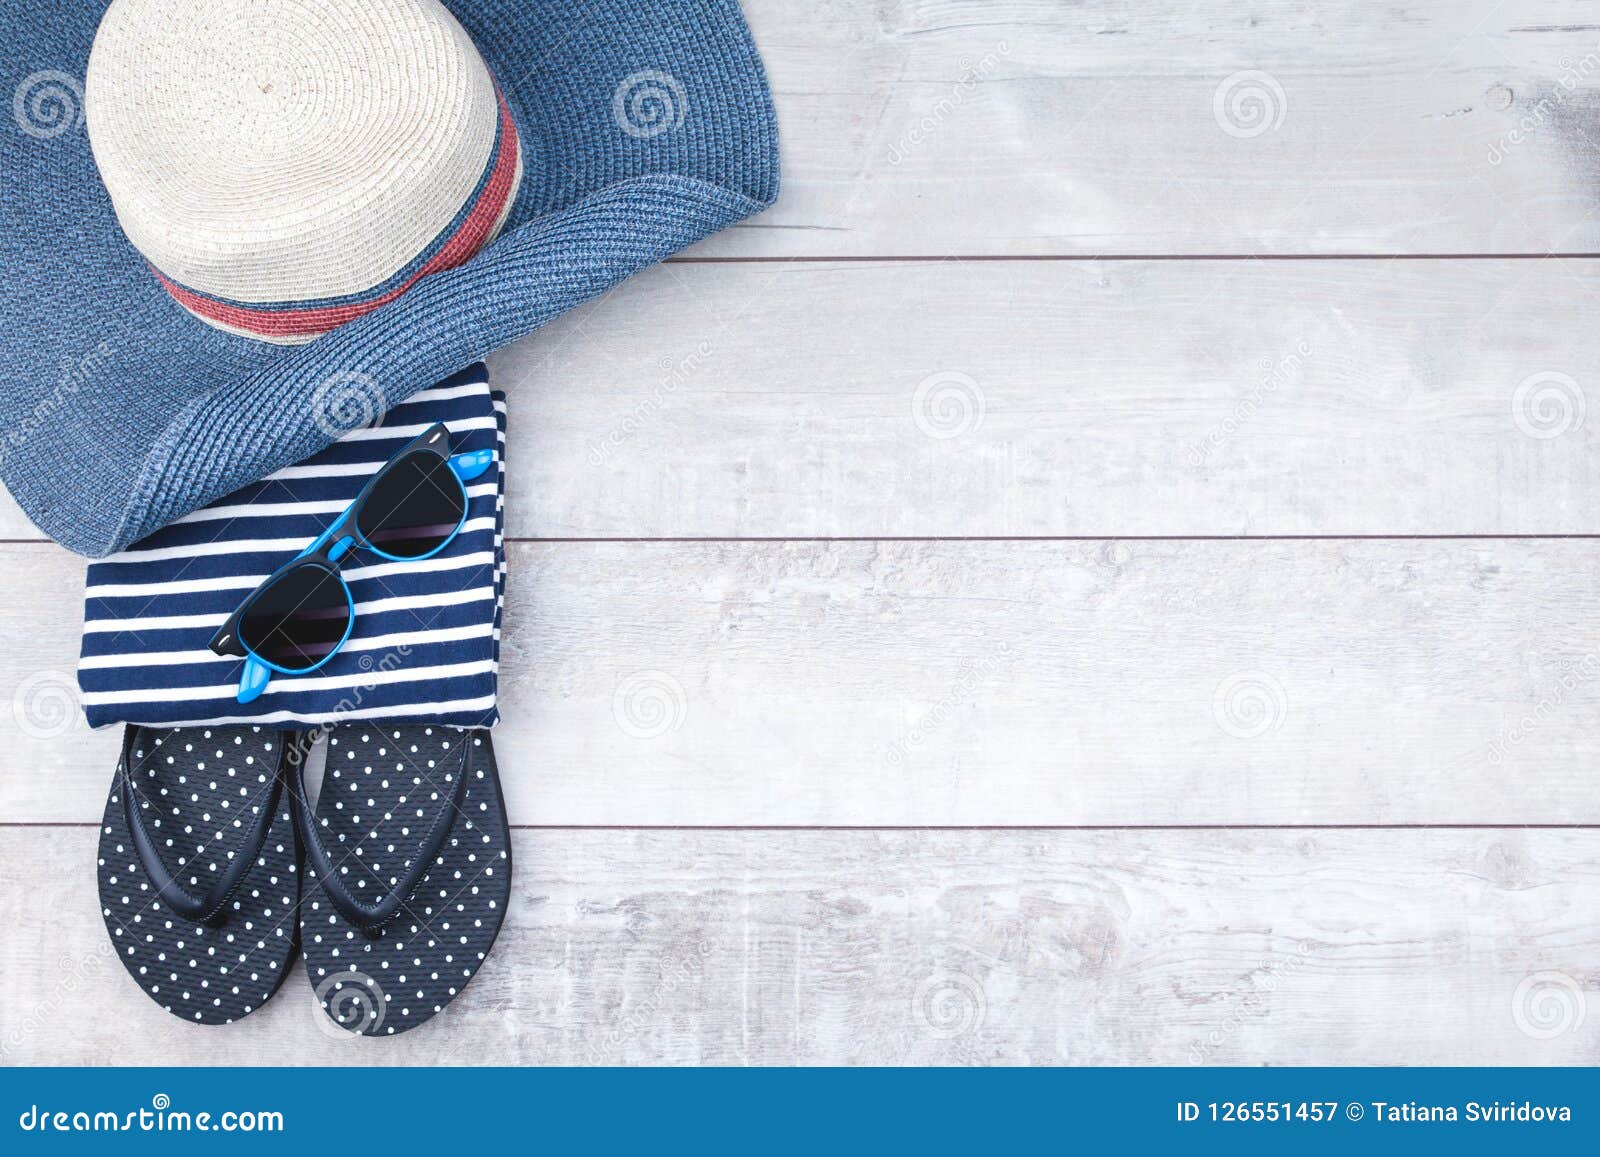 Female Marine Clothes and Accessories Stock Image - Image of beach ...